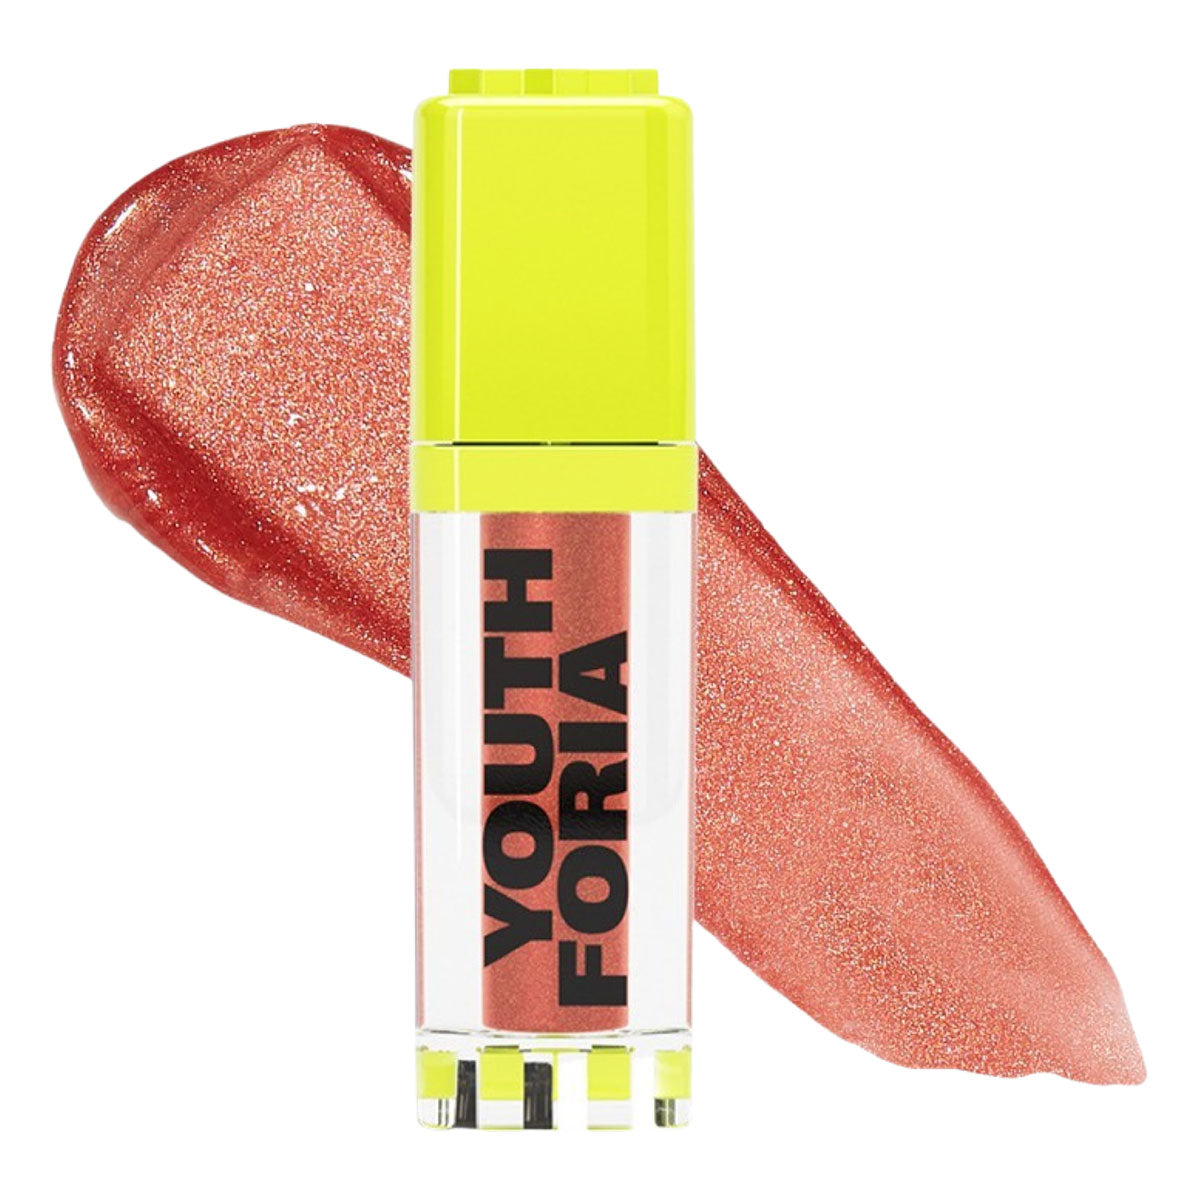 Youthforia Dewy Gloss Hydrating and Nourishing Lip Gloss | 09 Play With Fire